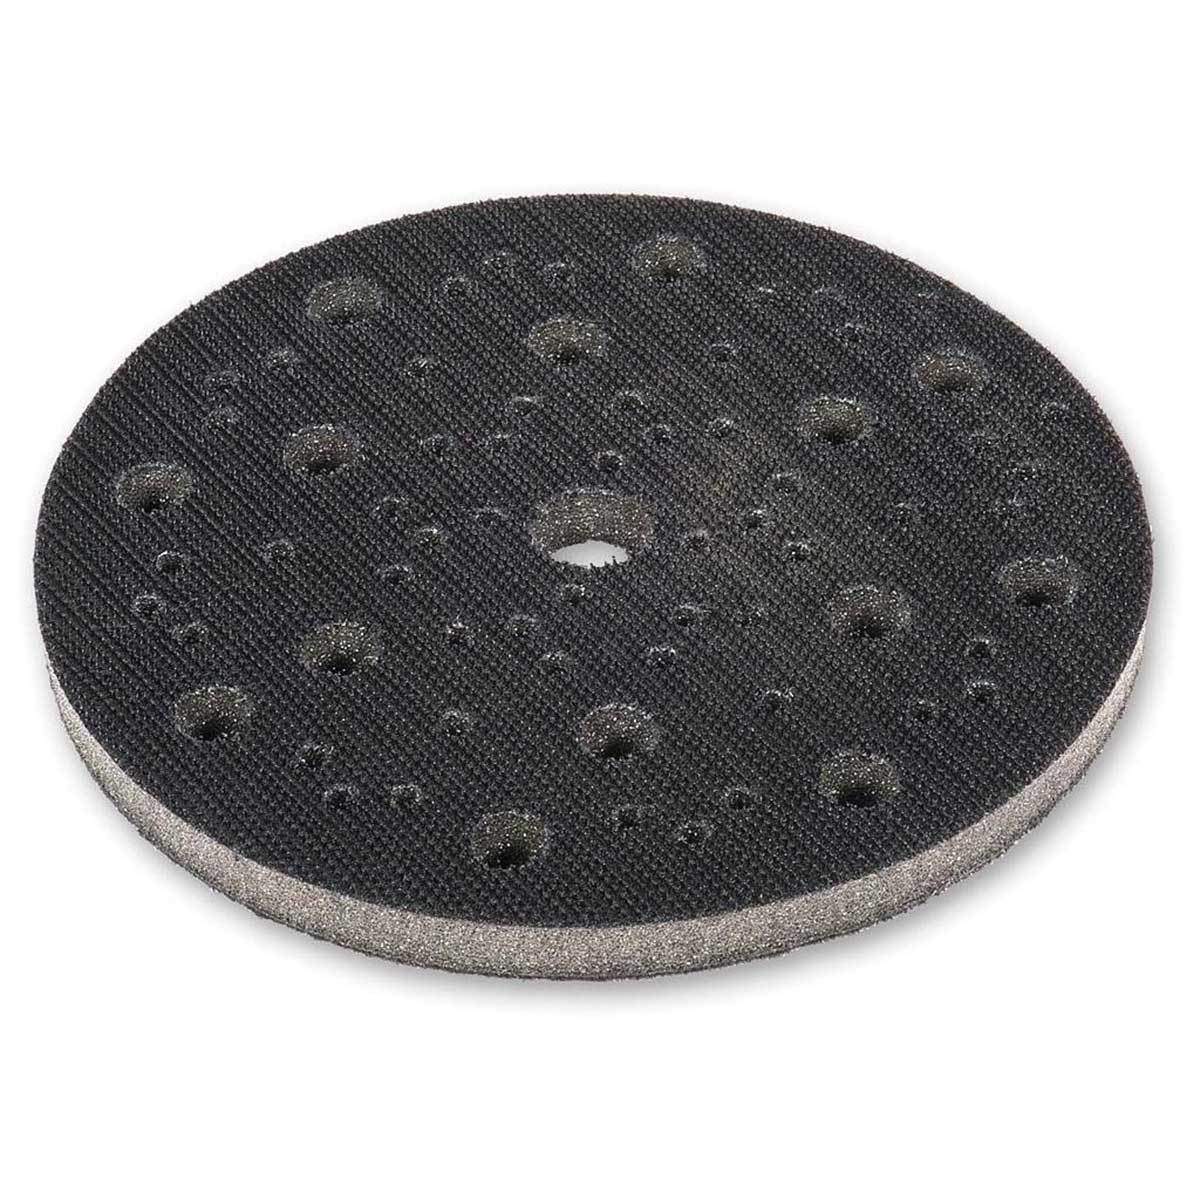 Mirka 6" black foam soft interface pad with hook facing for easy attachment of abrasives. Hole pattern matches 6" sanders.